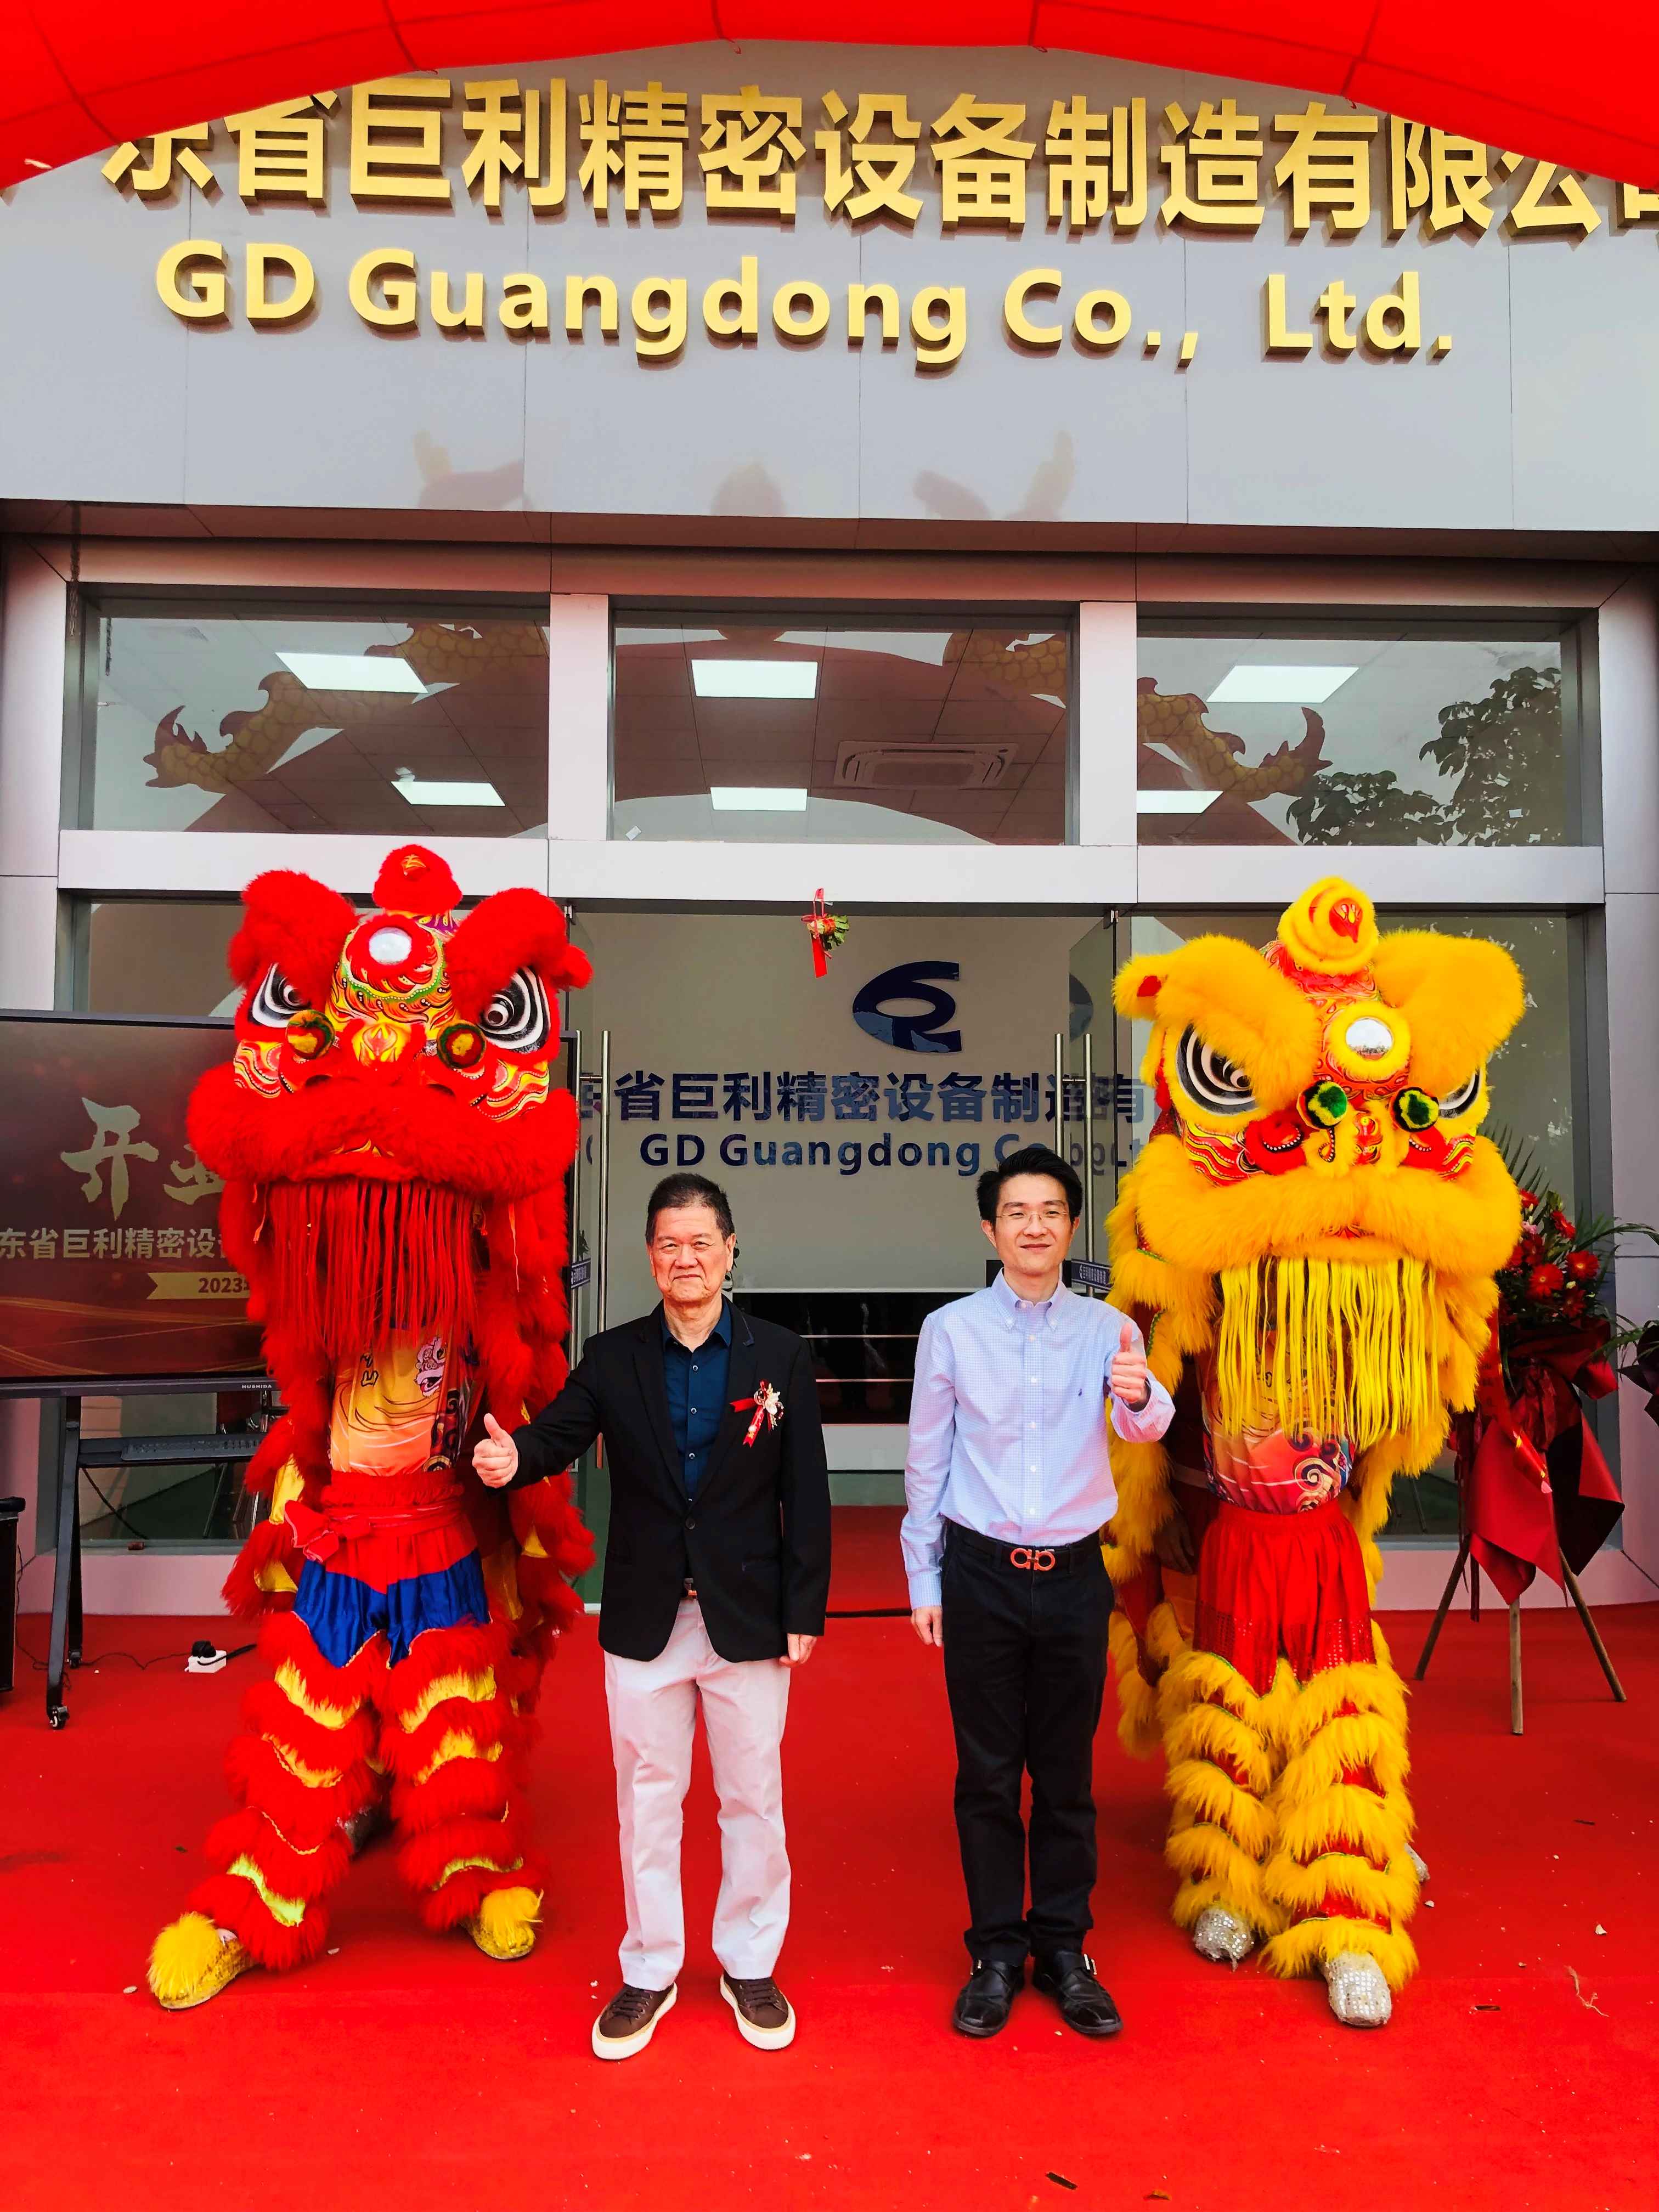 GD Guangdong Co., Ltd was established on March 5, 2023 in Foshan Guangdong Province, China